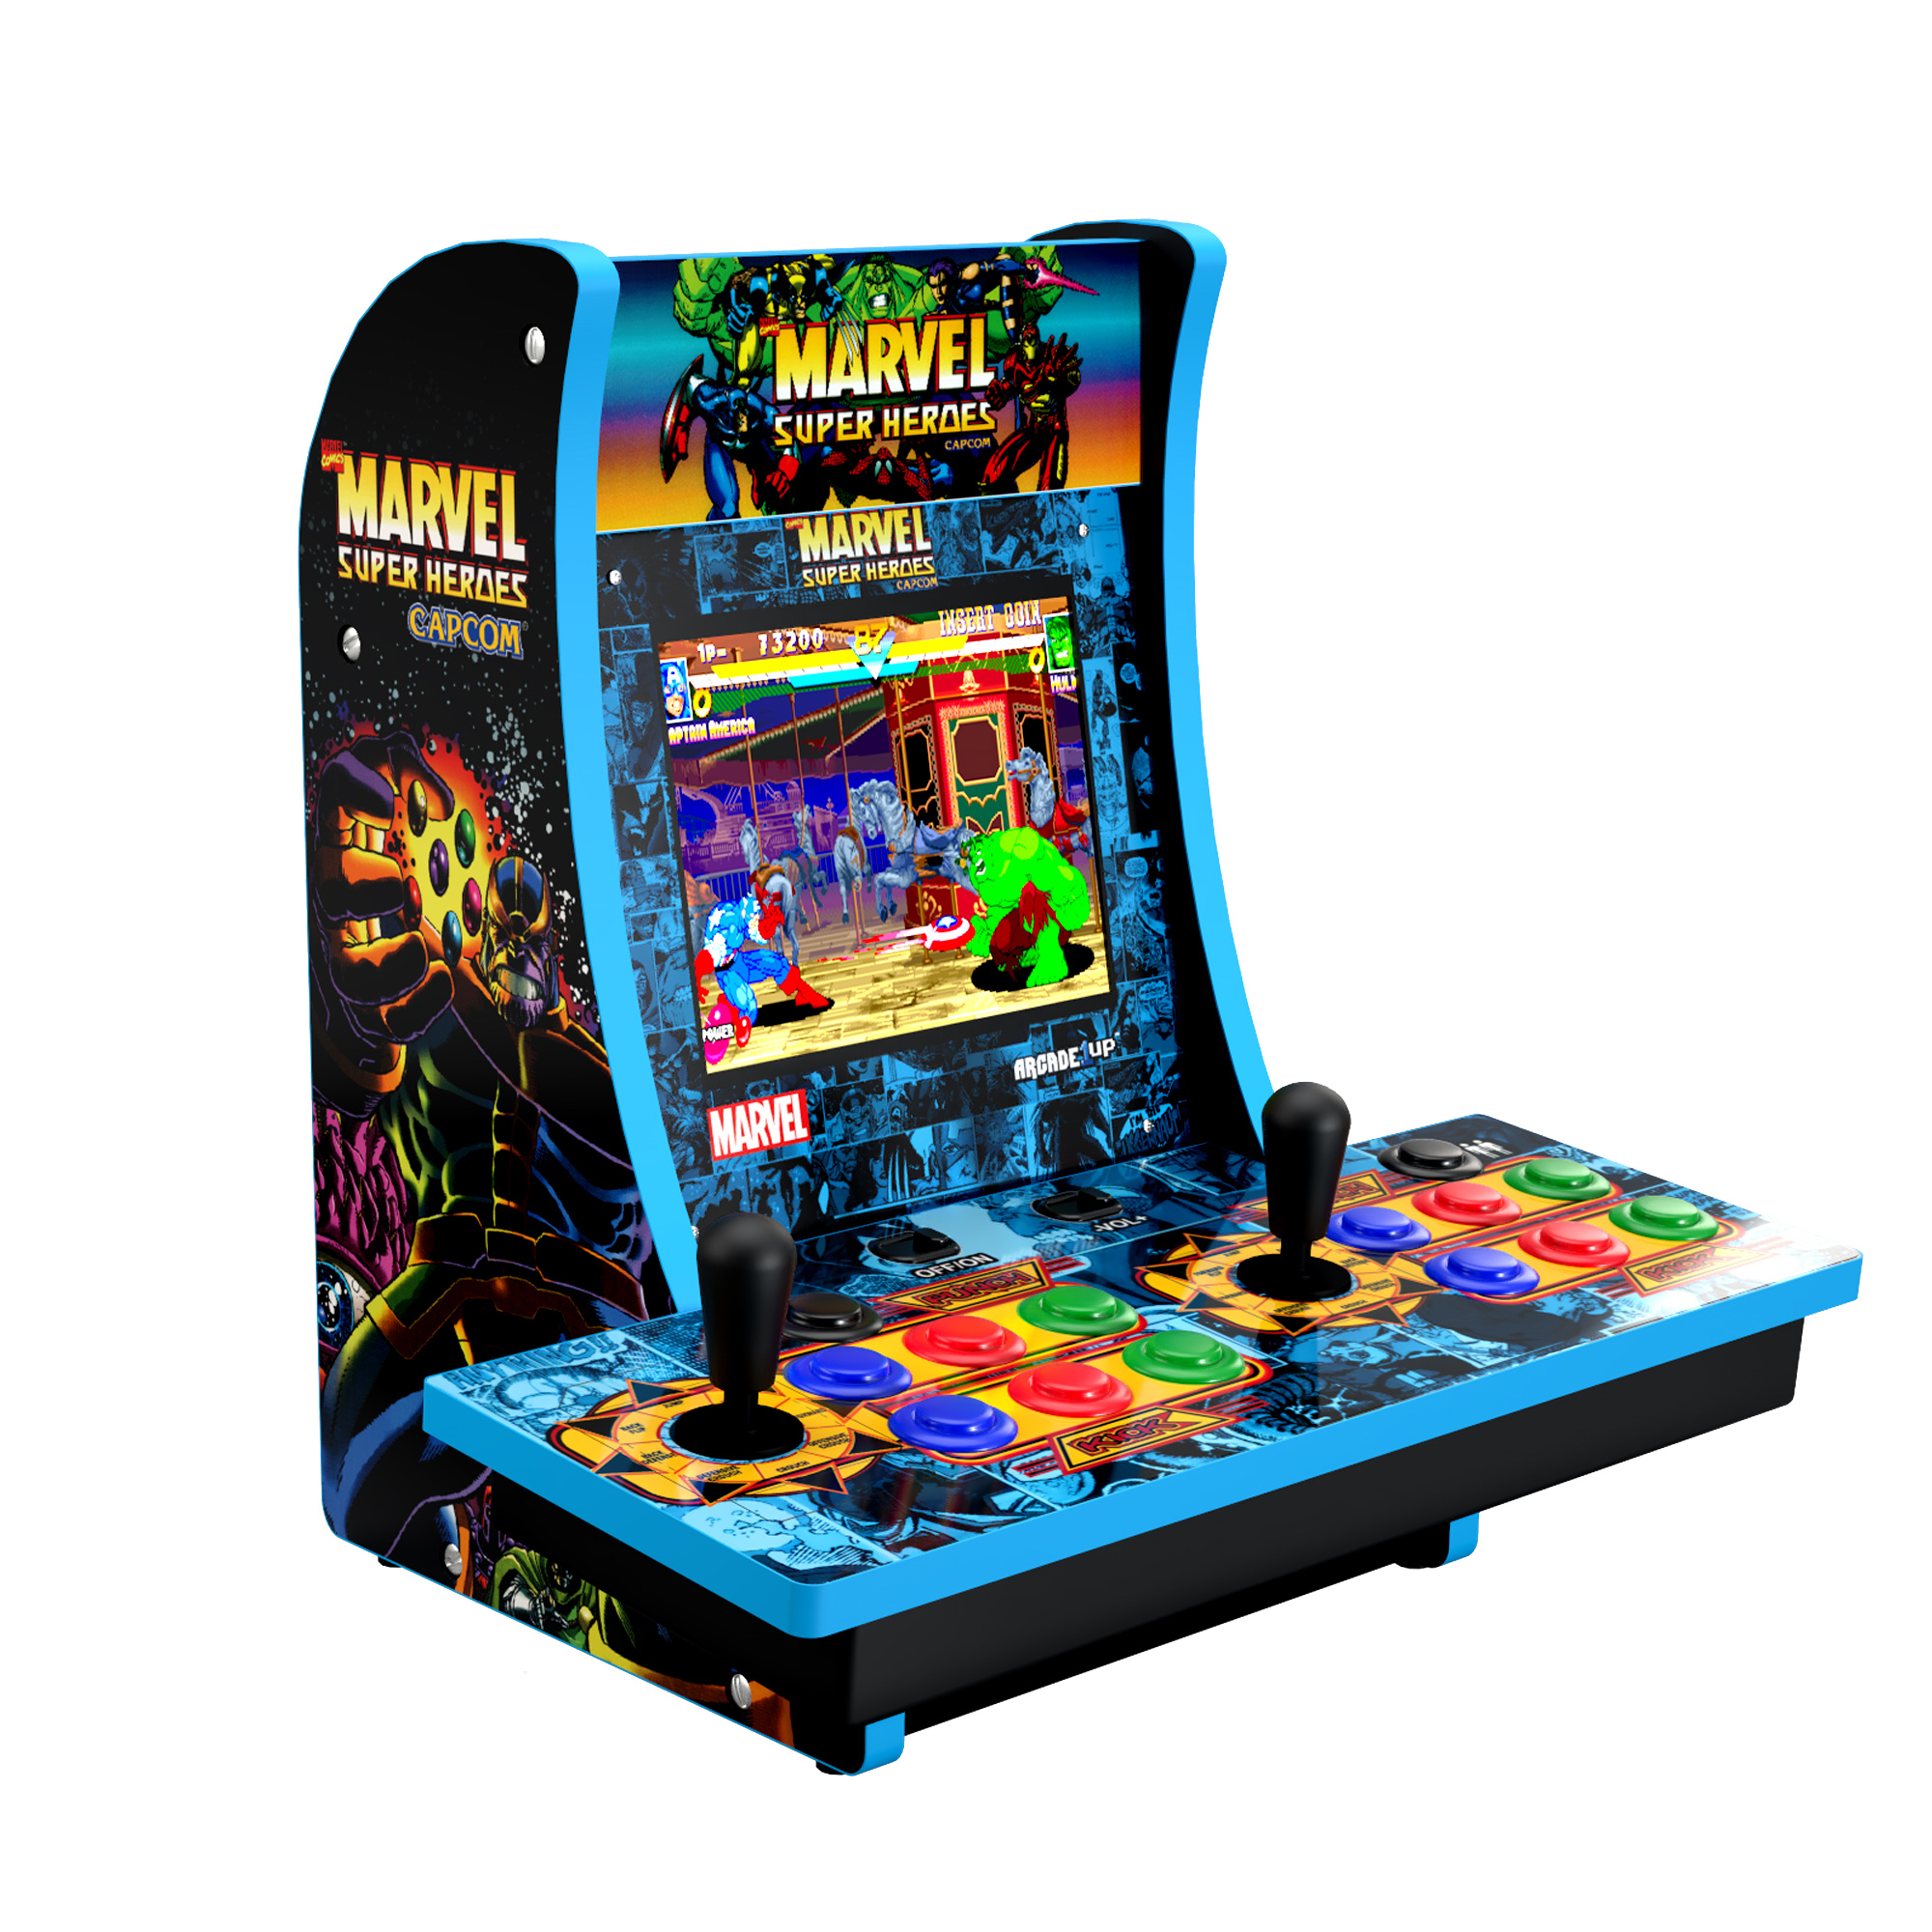 Arcade1UP Marvel Superheroes (2-Player) Counter-cade with Lit Marquee, Port and Headphone Jack - image 3 of 8